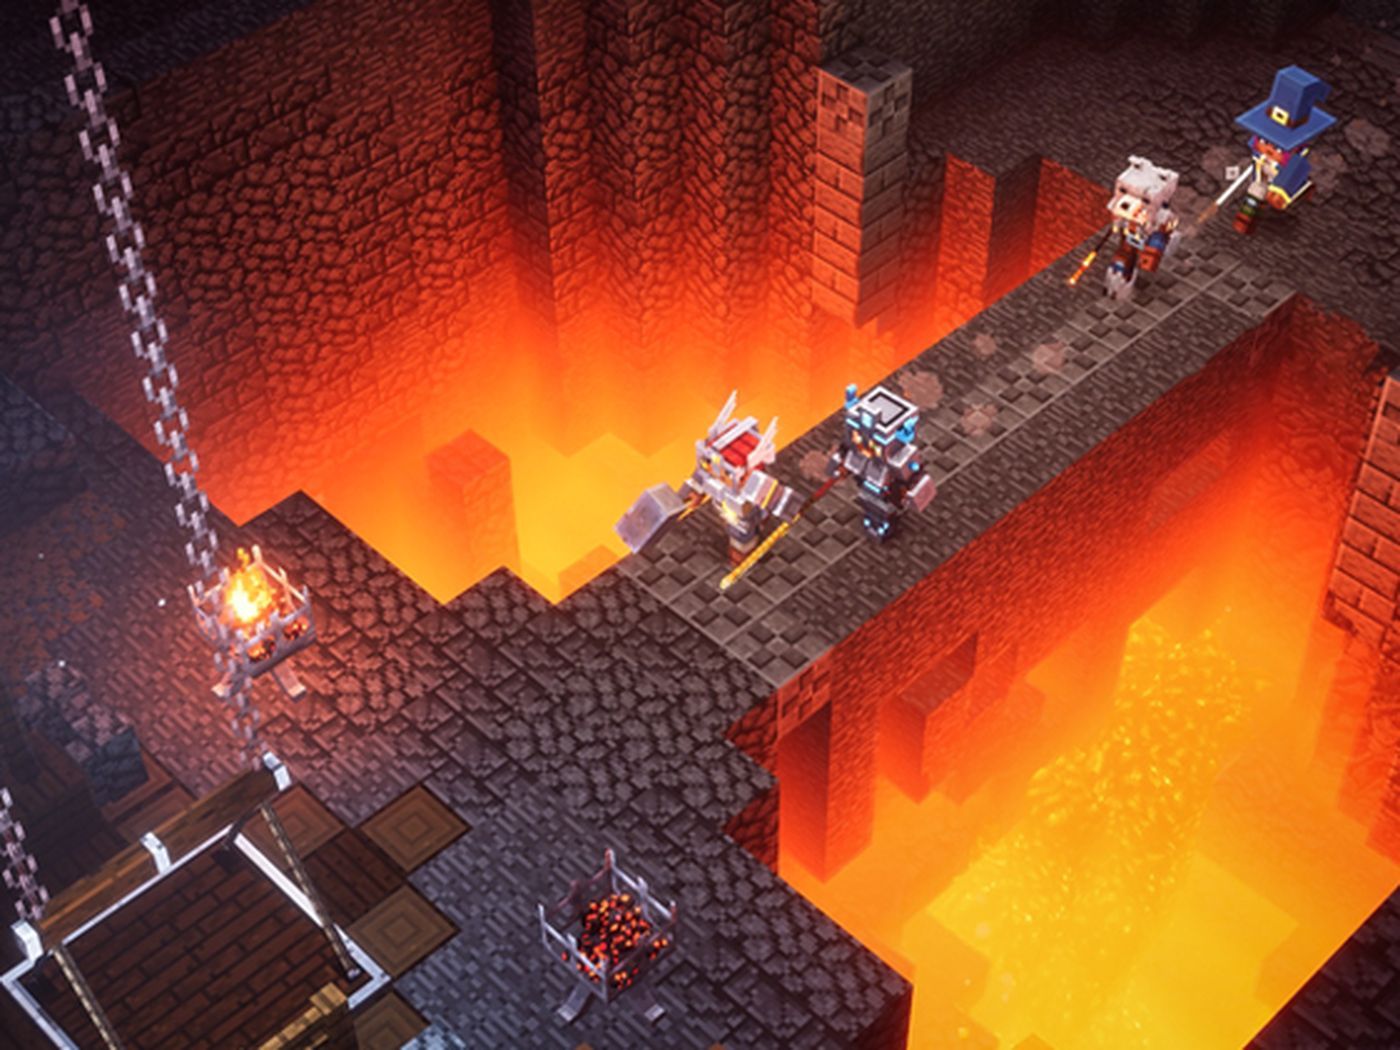 Minecraft Dungeons delayed, arriving on PC and consoles this May for $19.99